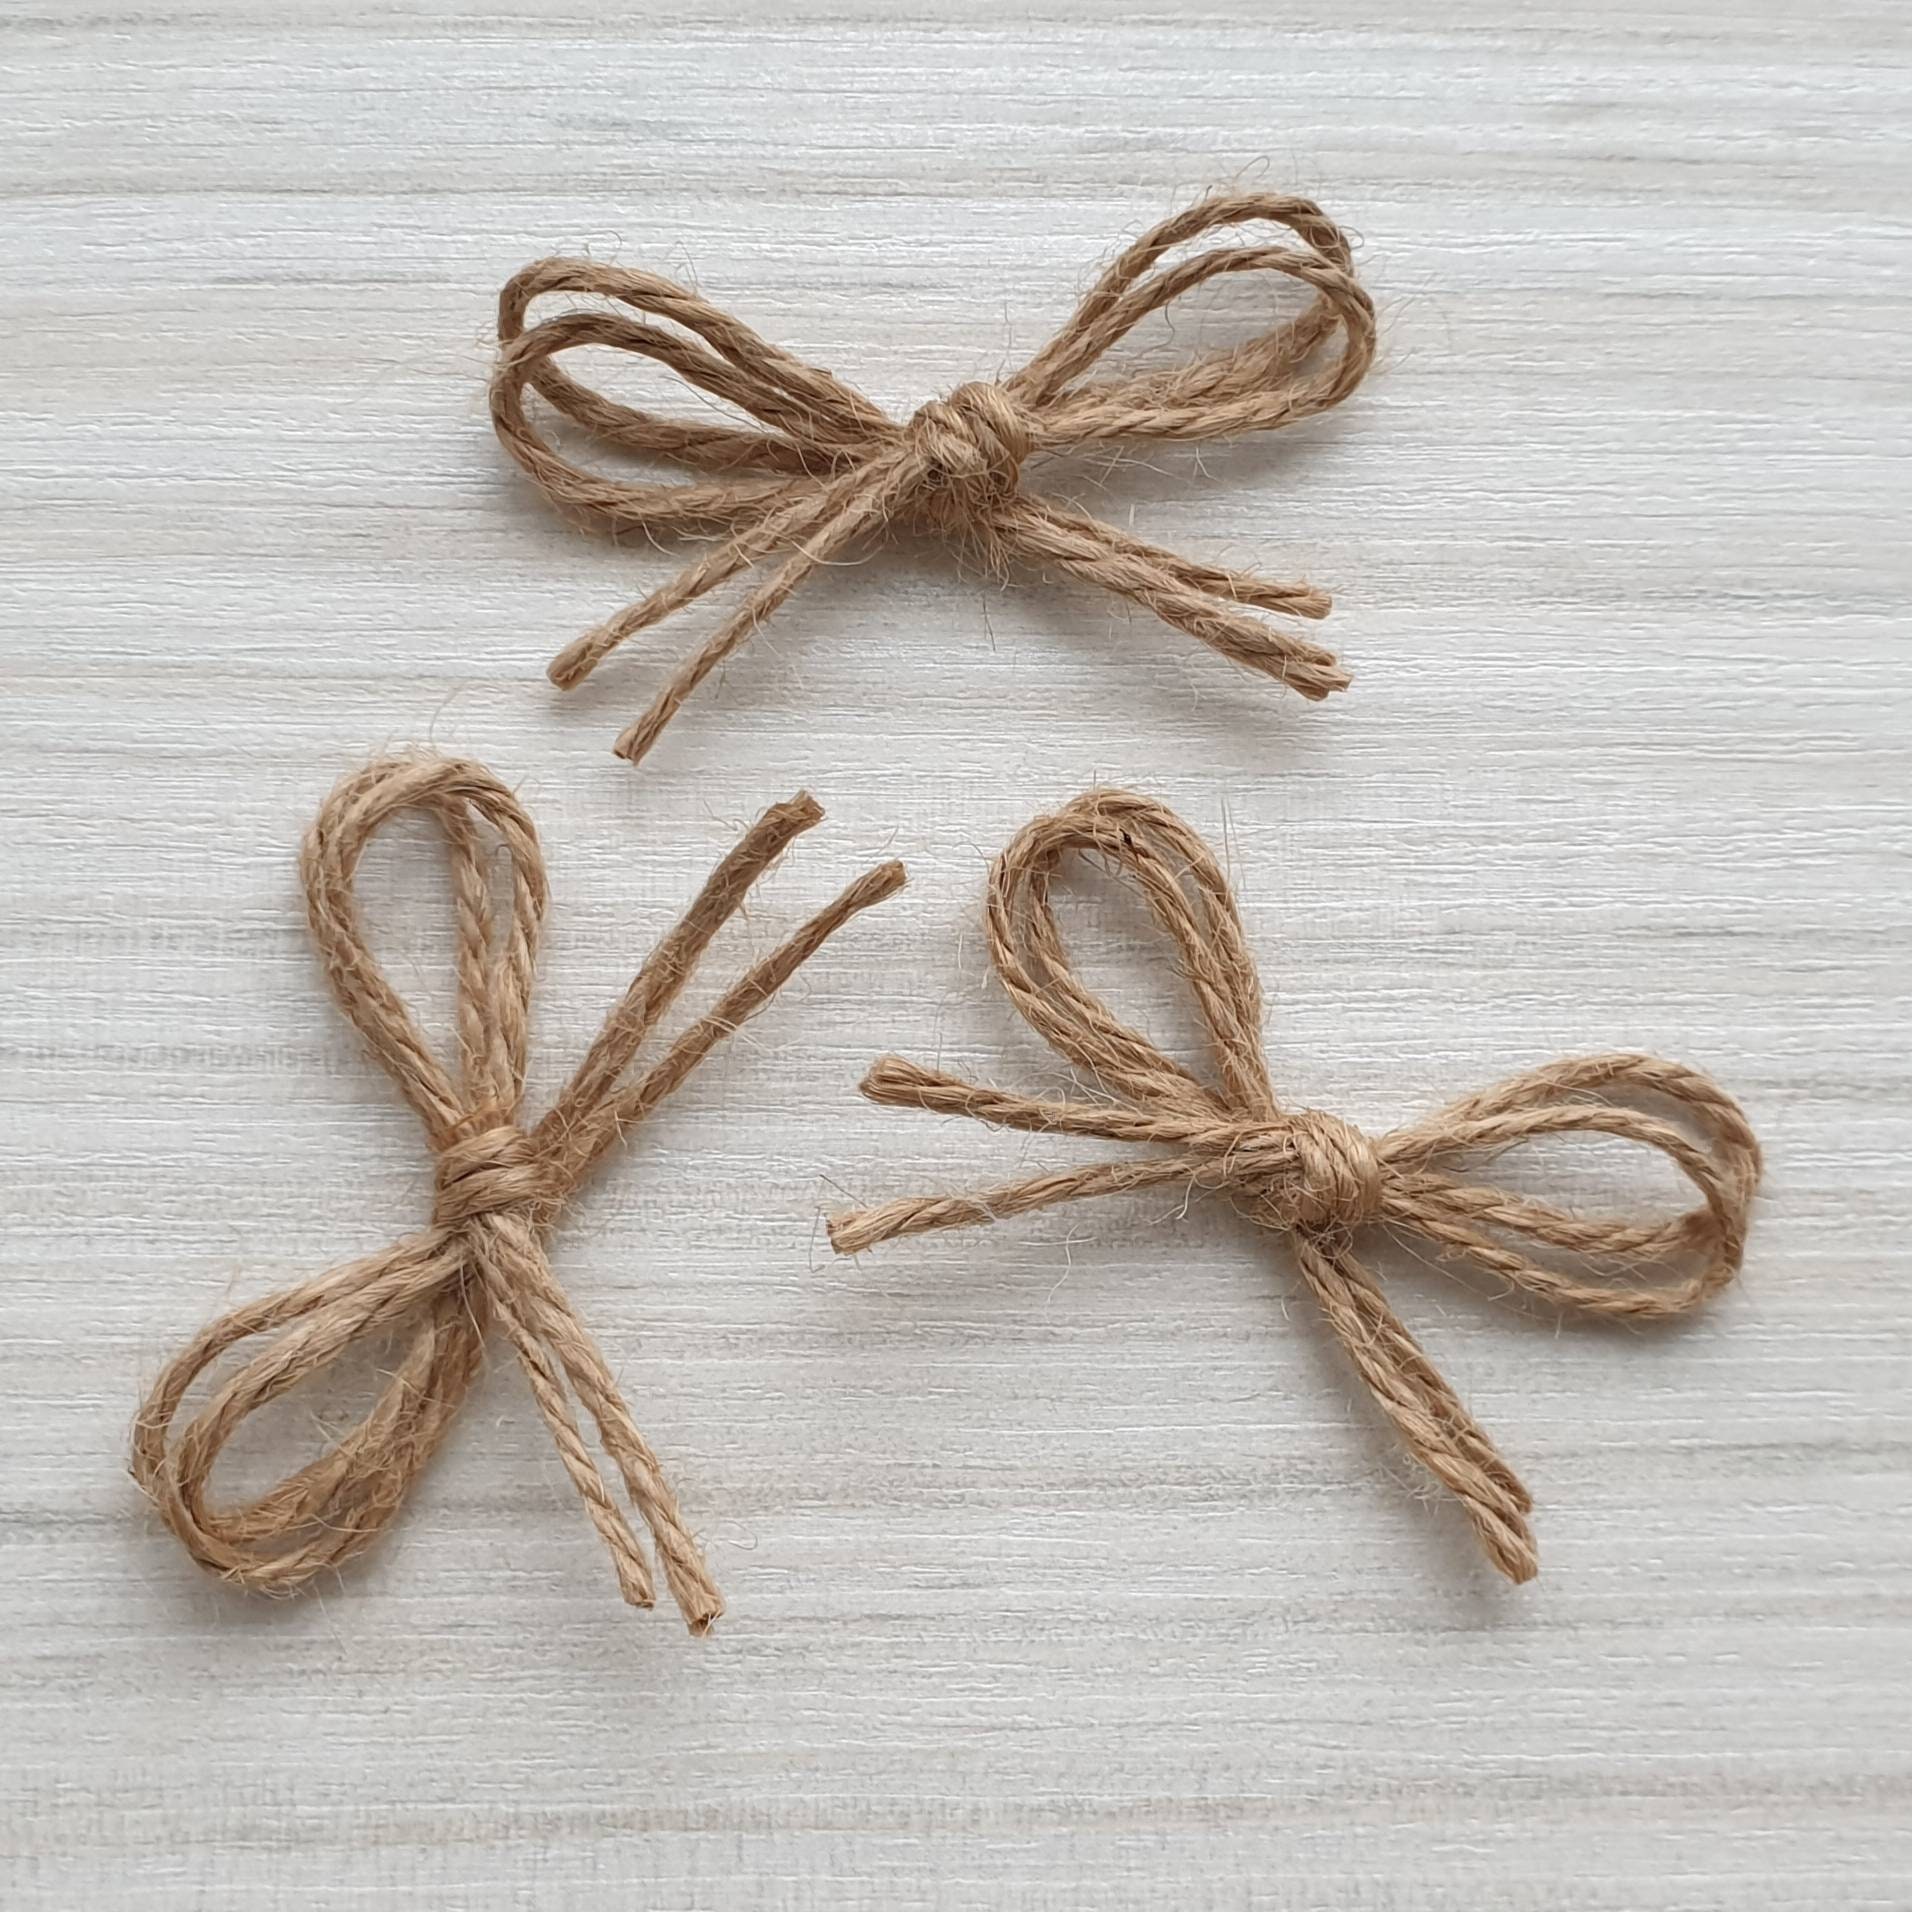 20/30/40/50 Jute Twine Mini Bows Applique Embellishments Wedding Decoration  Fabric Bow Card Making Scrapbooking Small Tiny Rustic Bows -  Canada